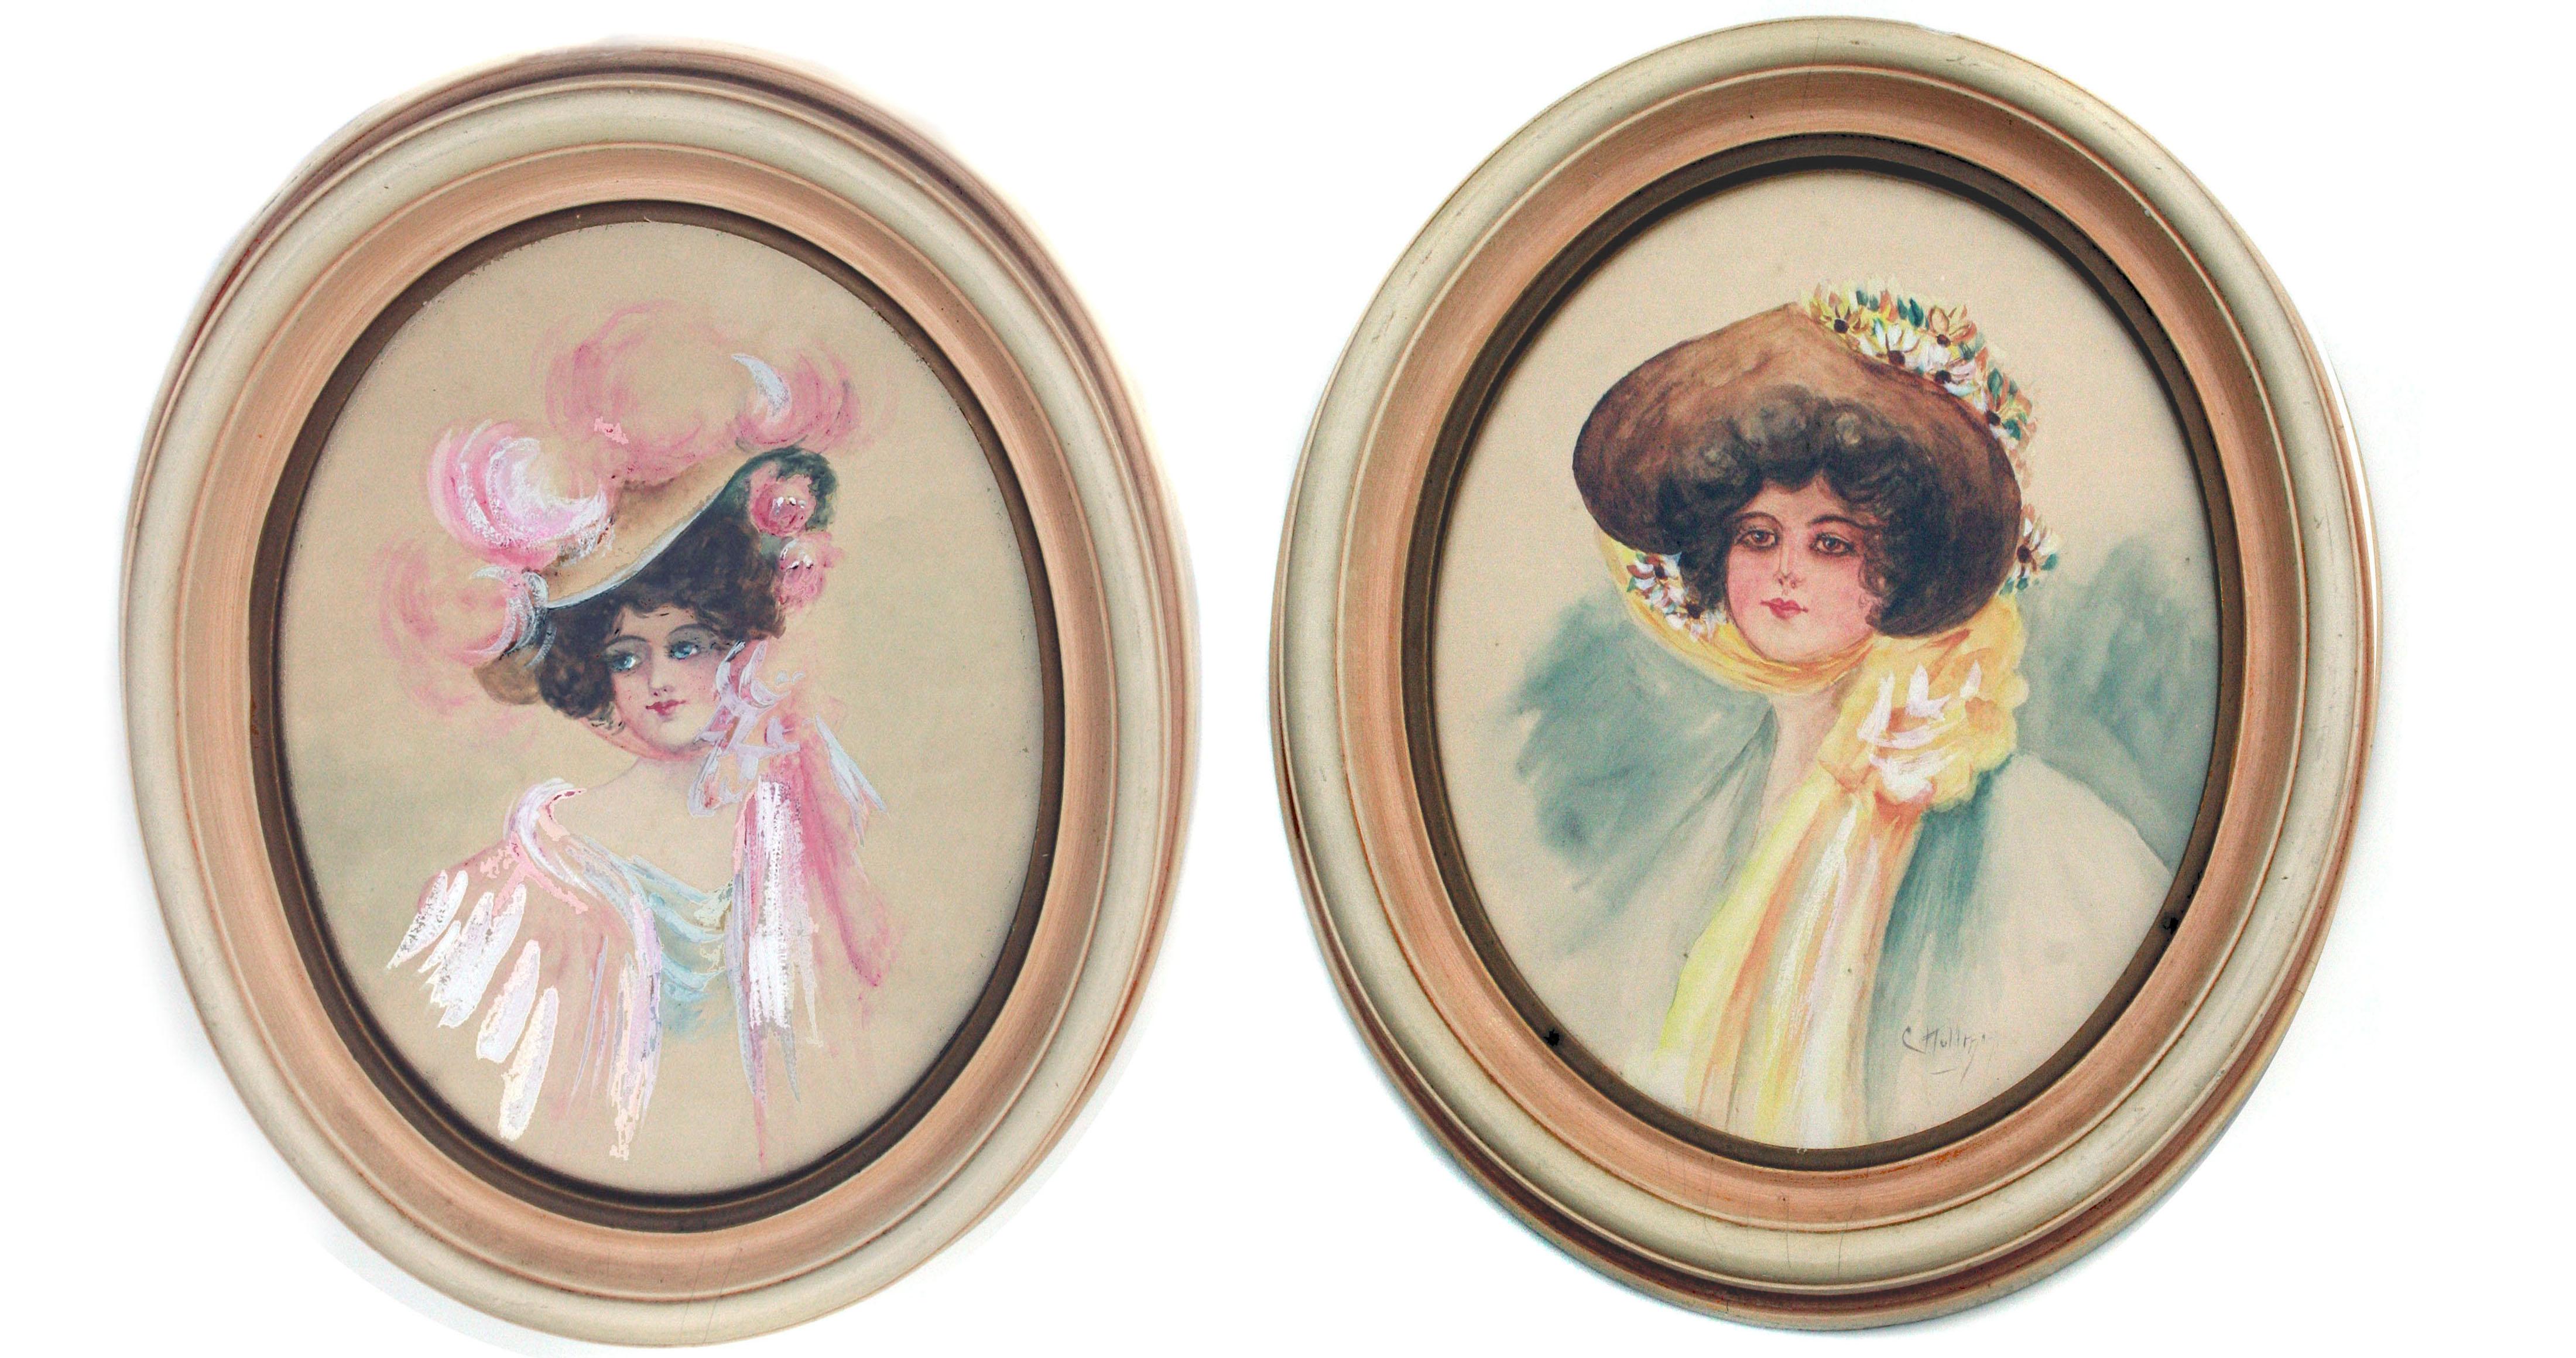 Charles Hollman Figurative Painting - Gibson Girls - Set of Two 1920's Portraits, Vintage Fashion Illustrations